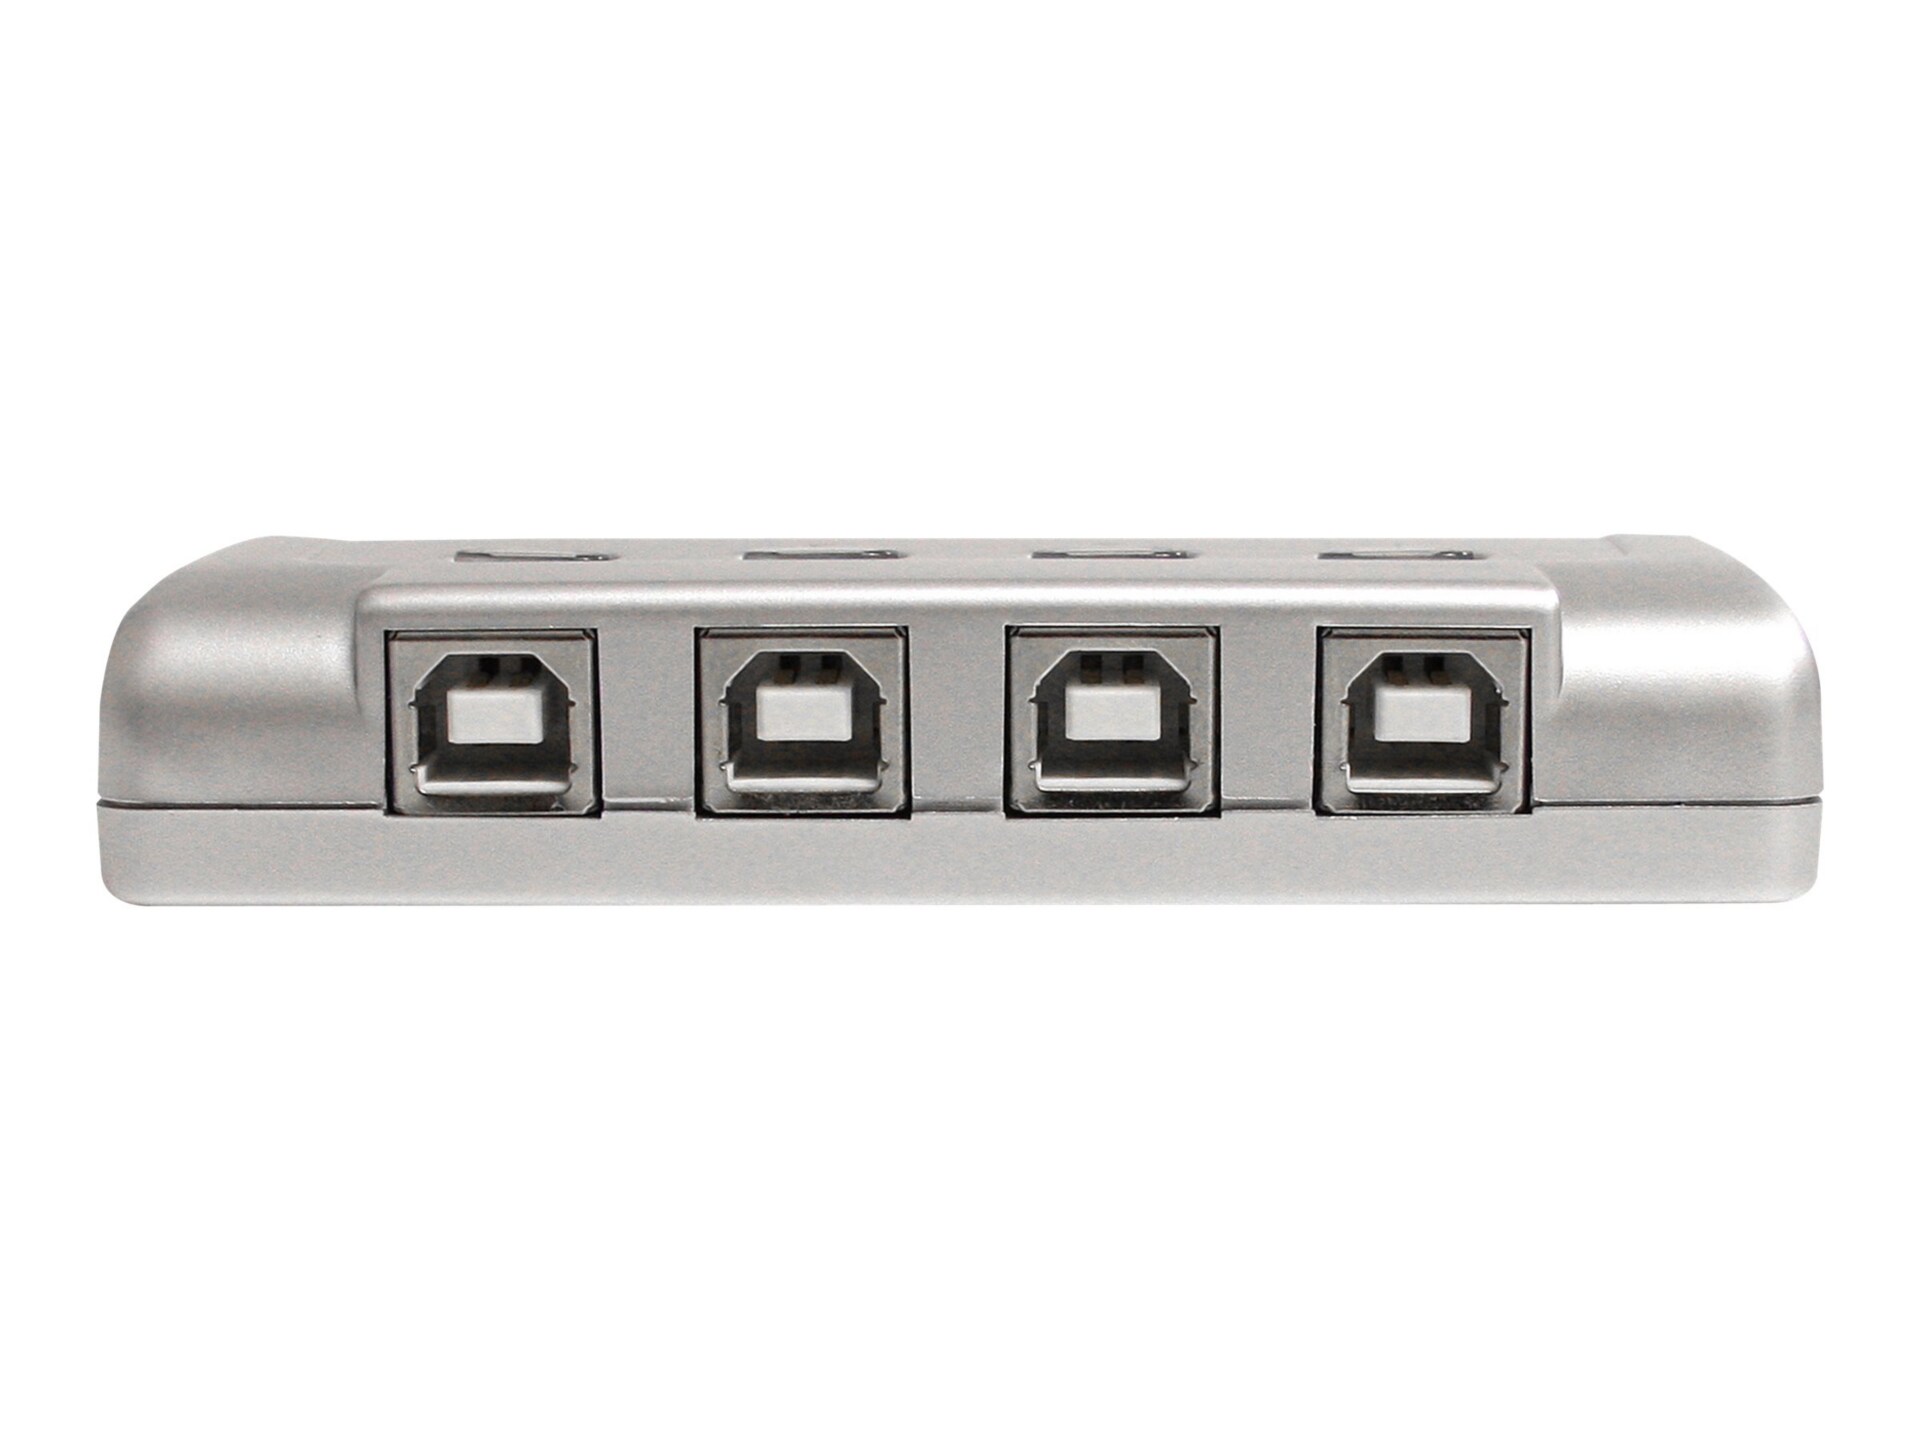 StarTech.com 4-to-1 USB 2.0 Peripheral Sharing Switch - USB peripheral sharing switch - 4 ports